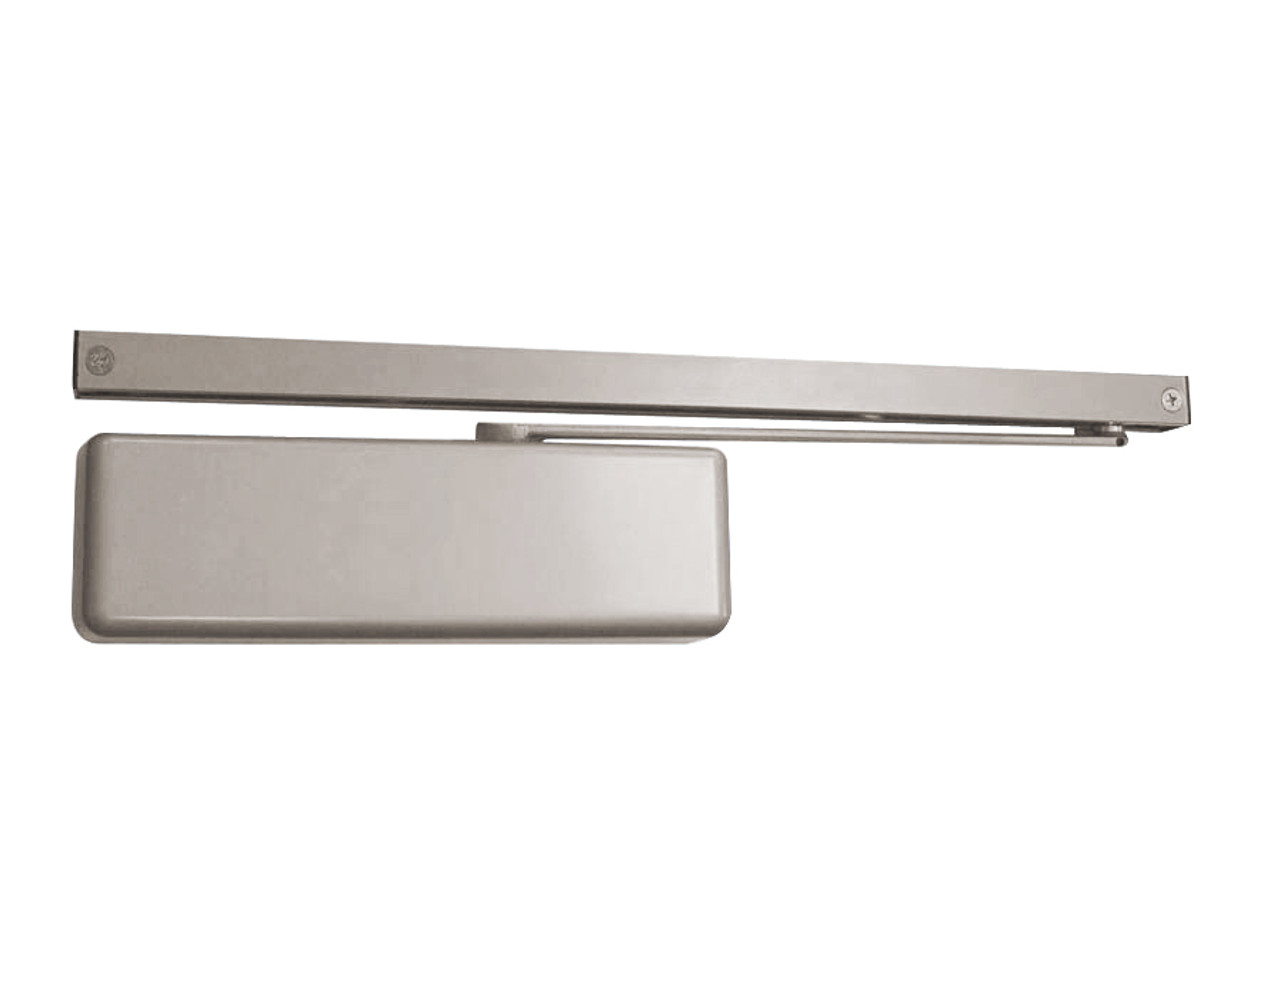 4014T-H-LH-US26 LCN Door Closer with Hold-Open Arm in Bright Chrome Finish